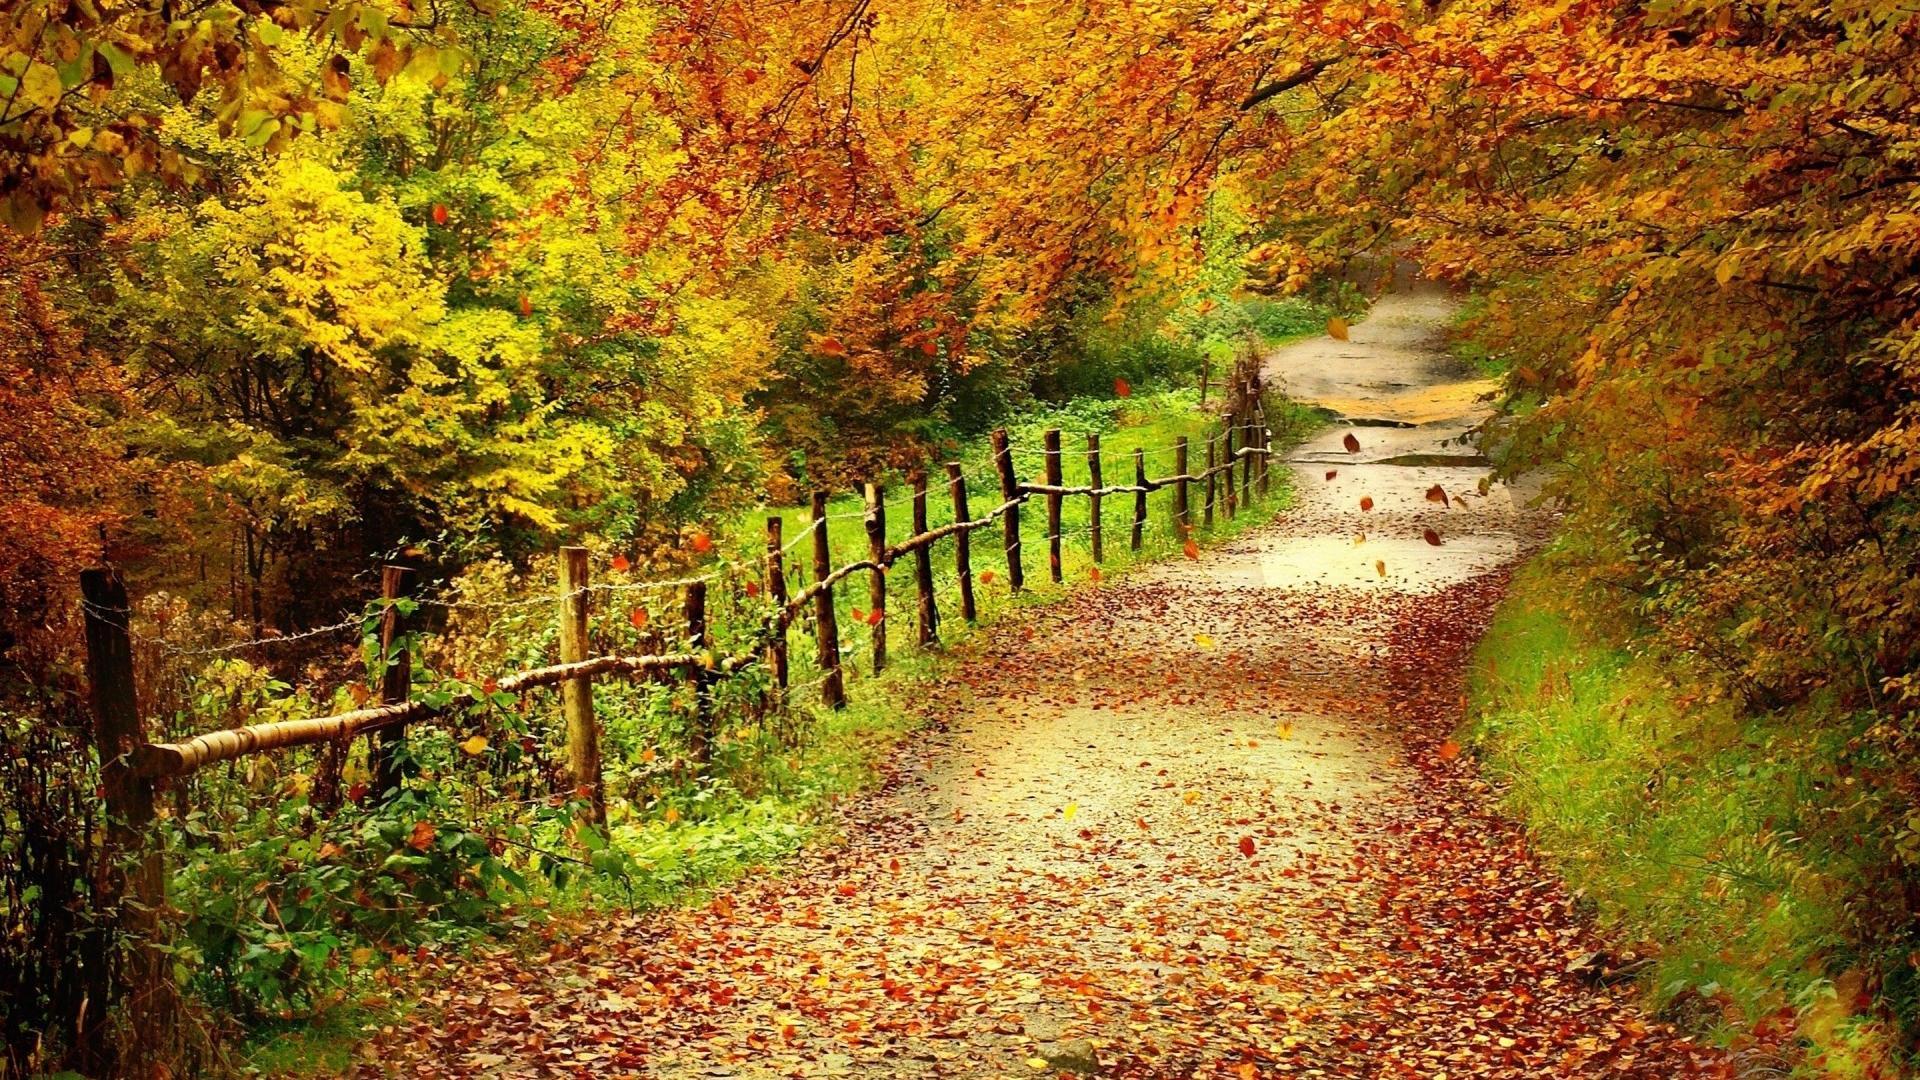 Autumn country road wallpaper